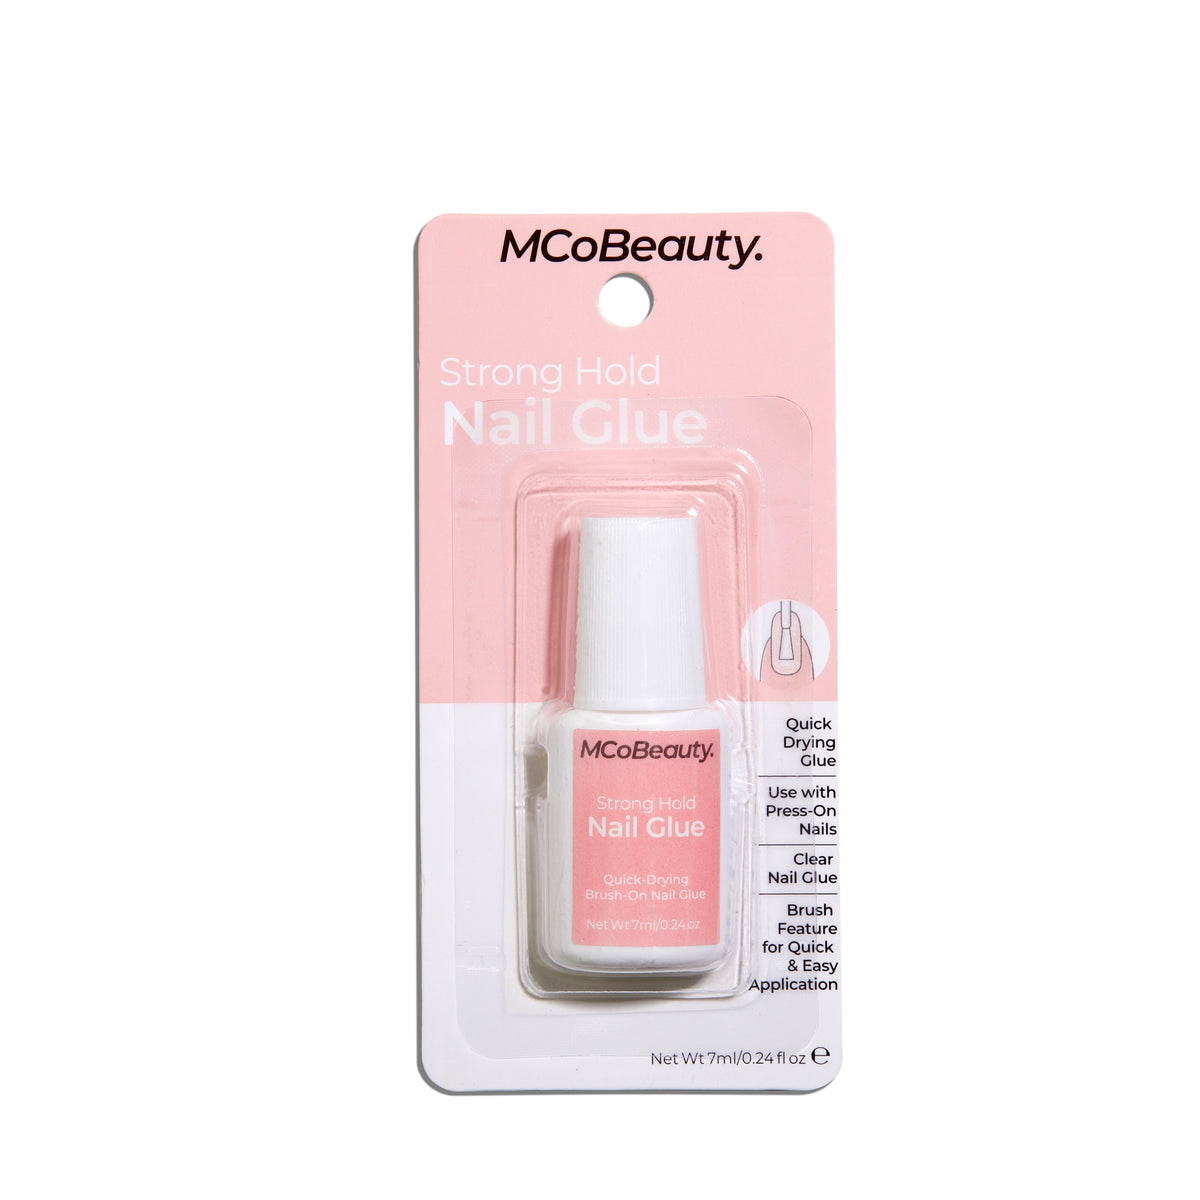 Strong Hold Nail Glue – MCoBeauty International